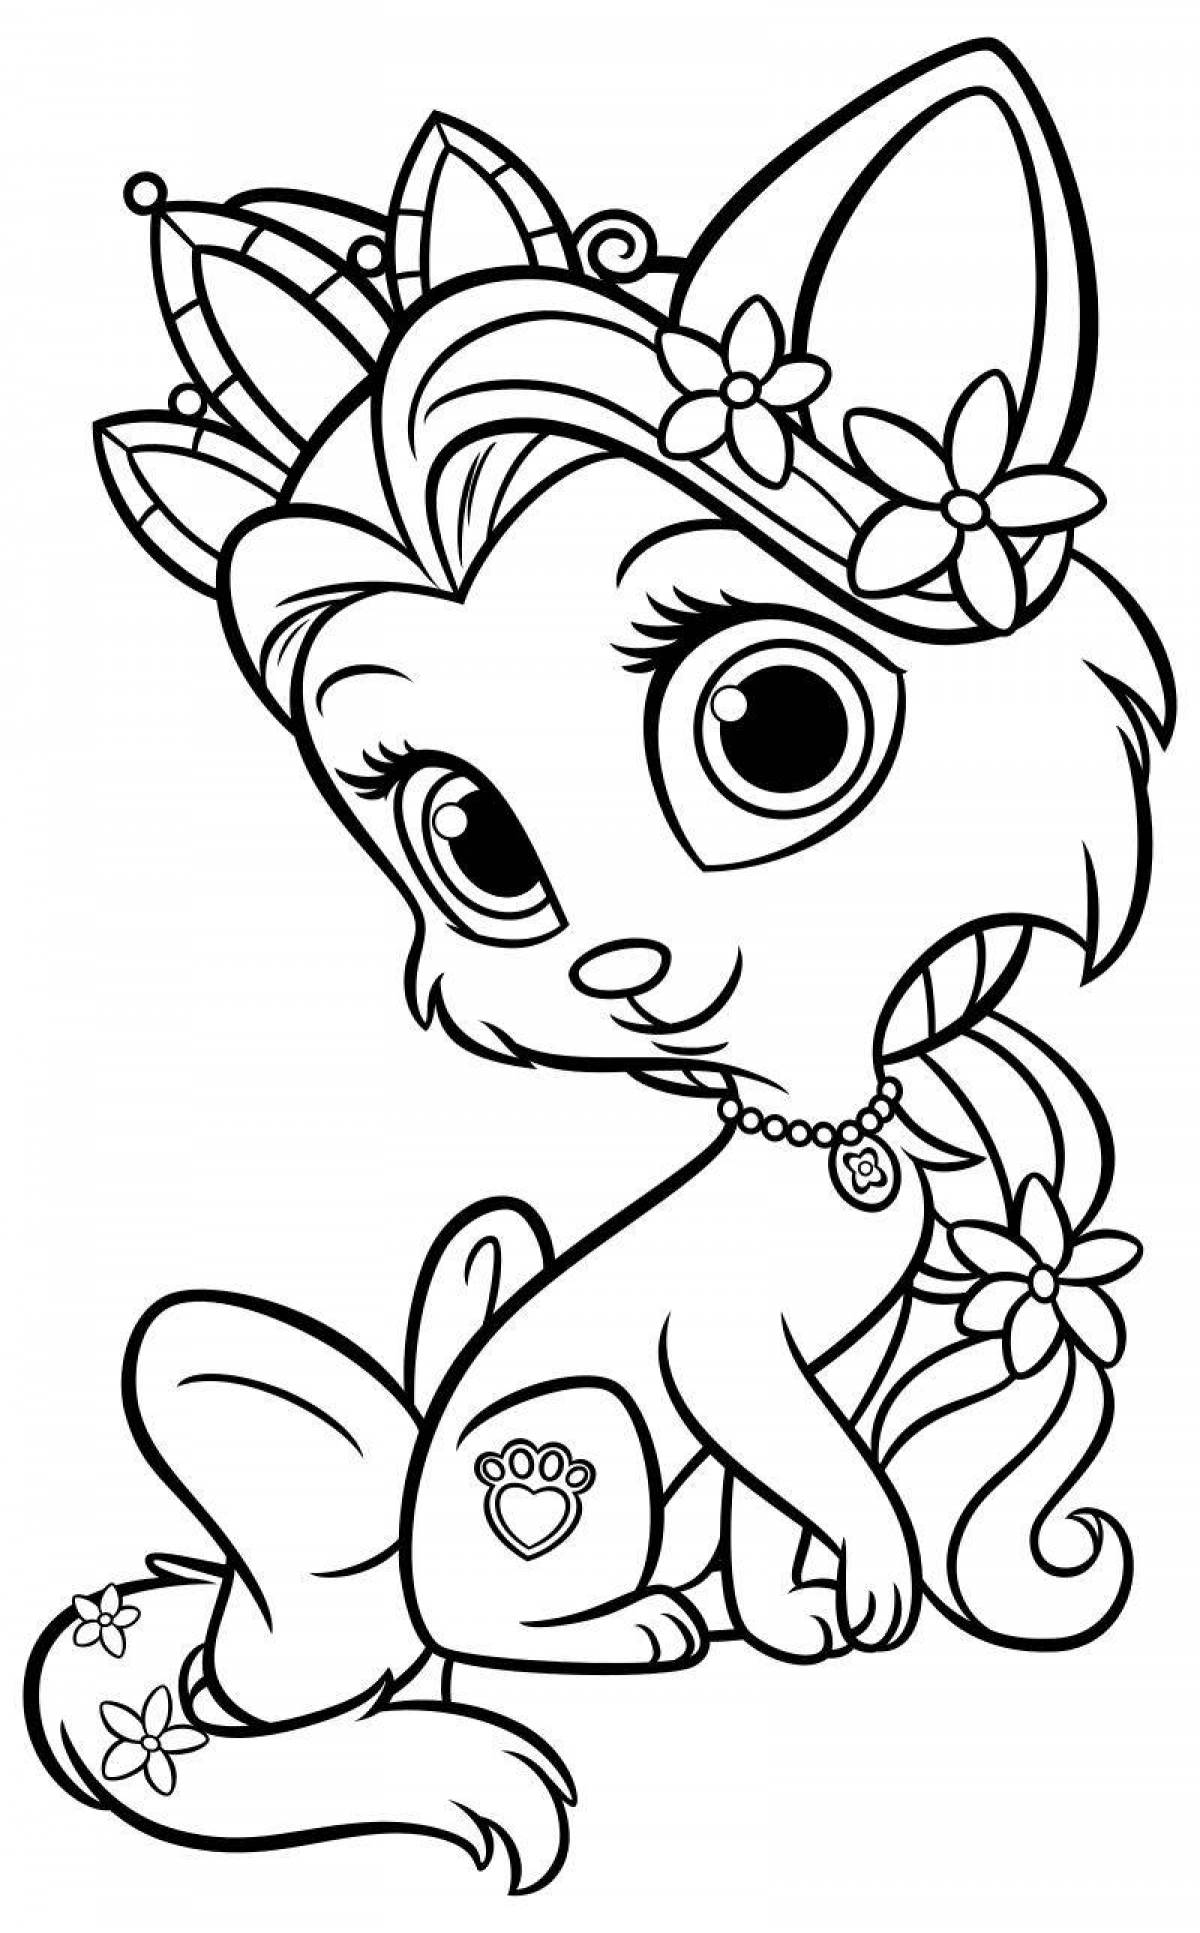 Cute cat coloring pages for girls